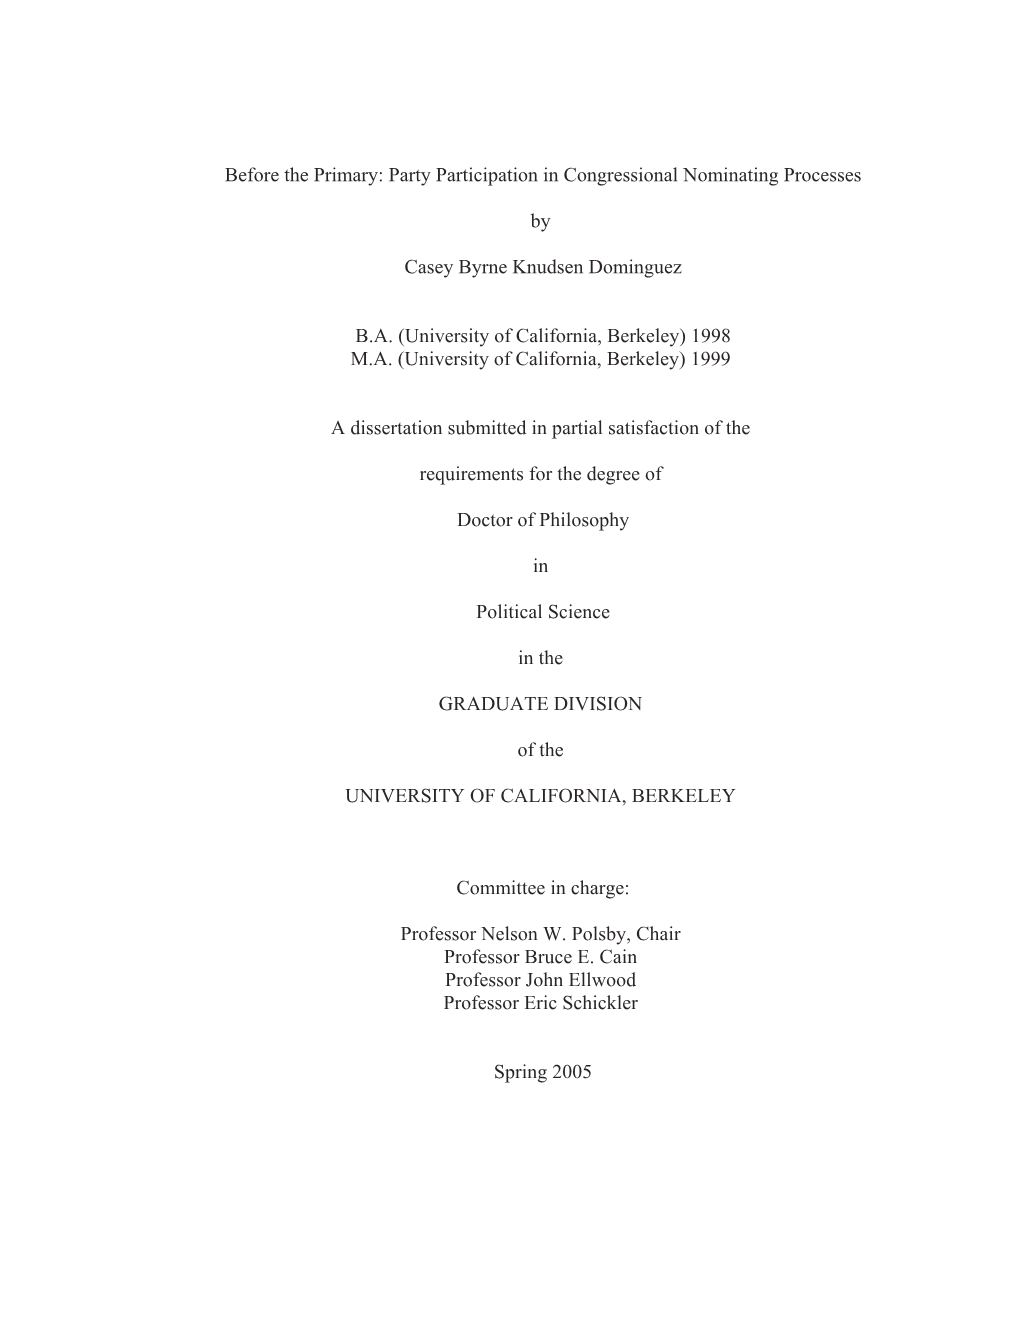 Dissertation: Before the Primary: Party Participation in Congressional Nominating Processes